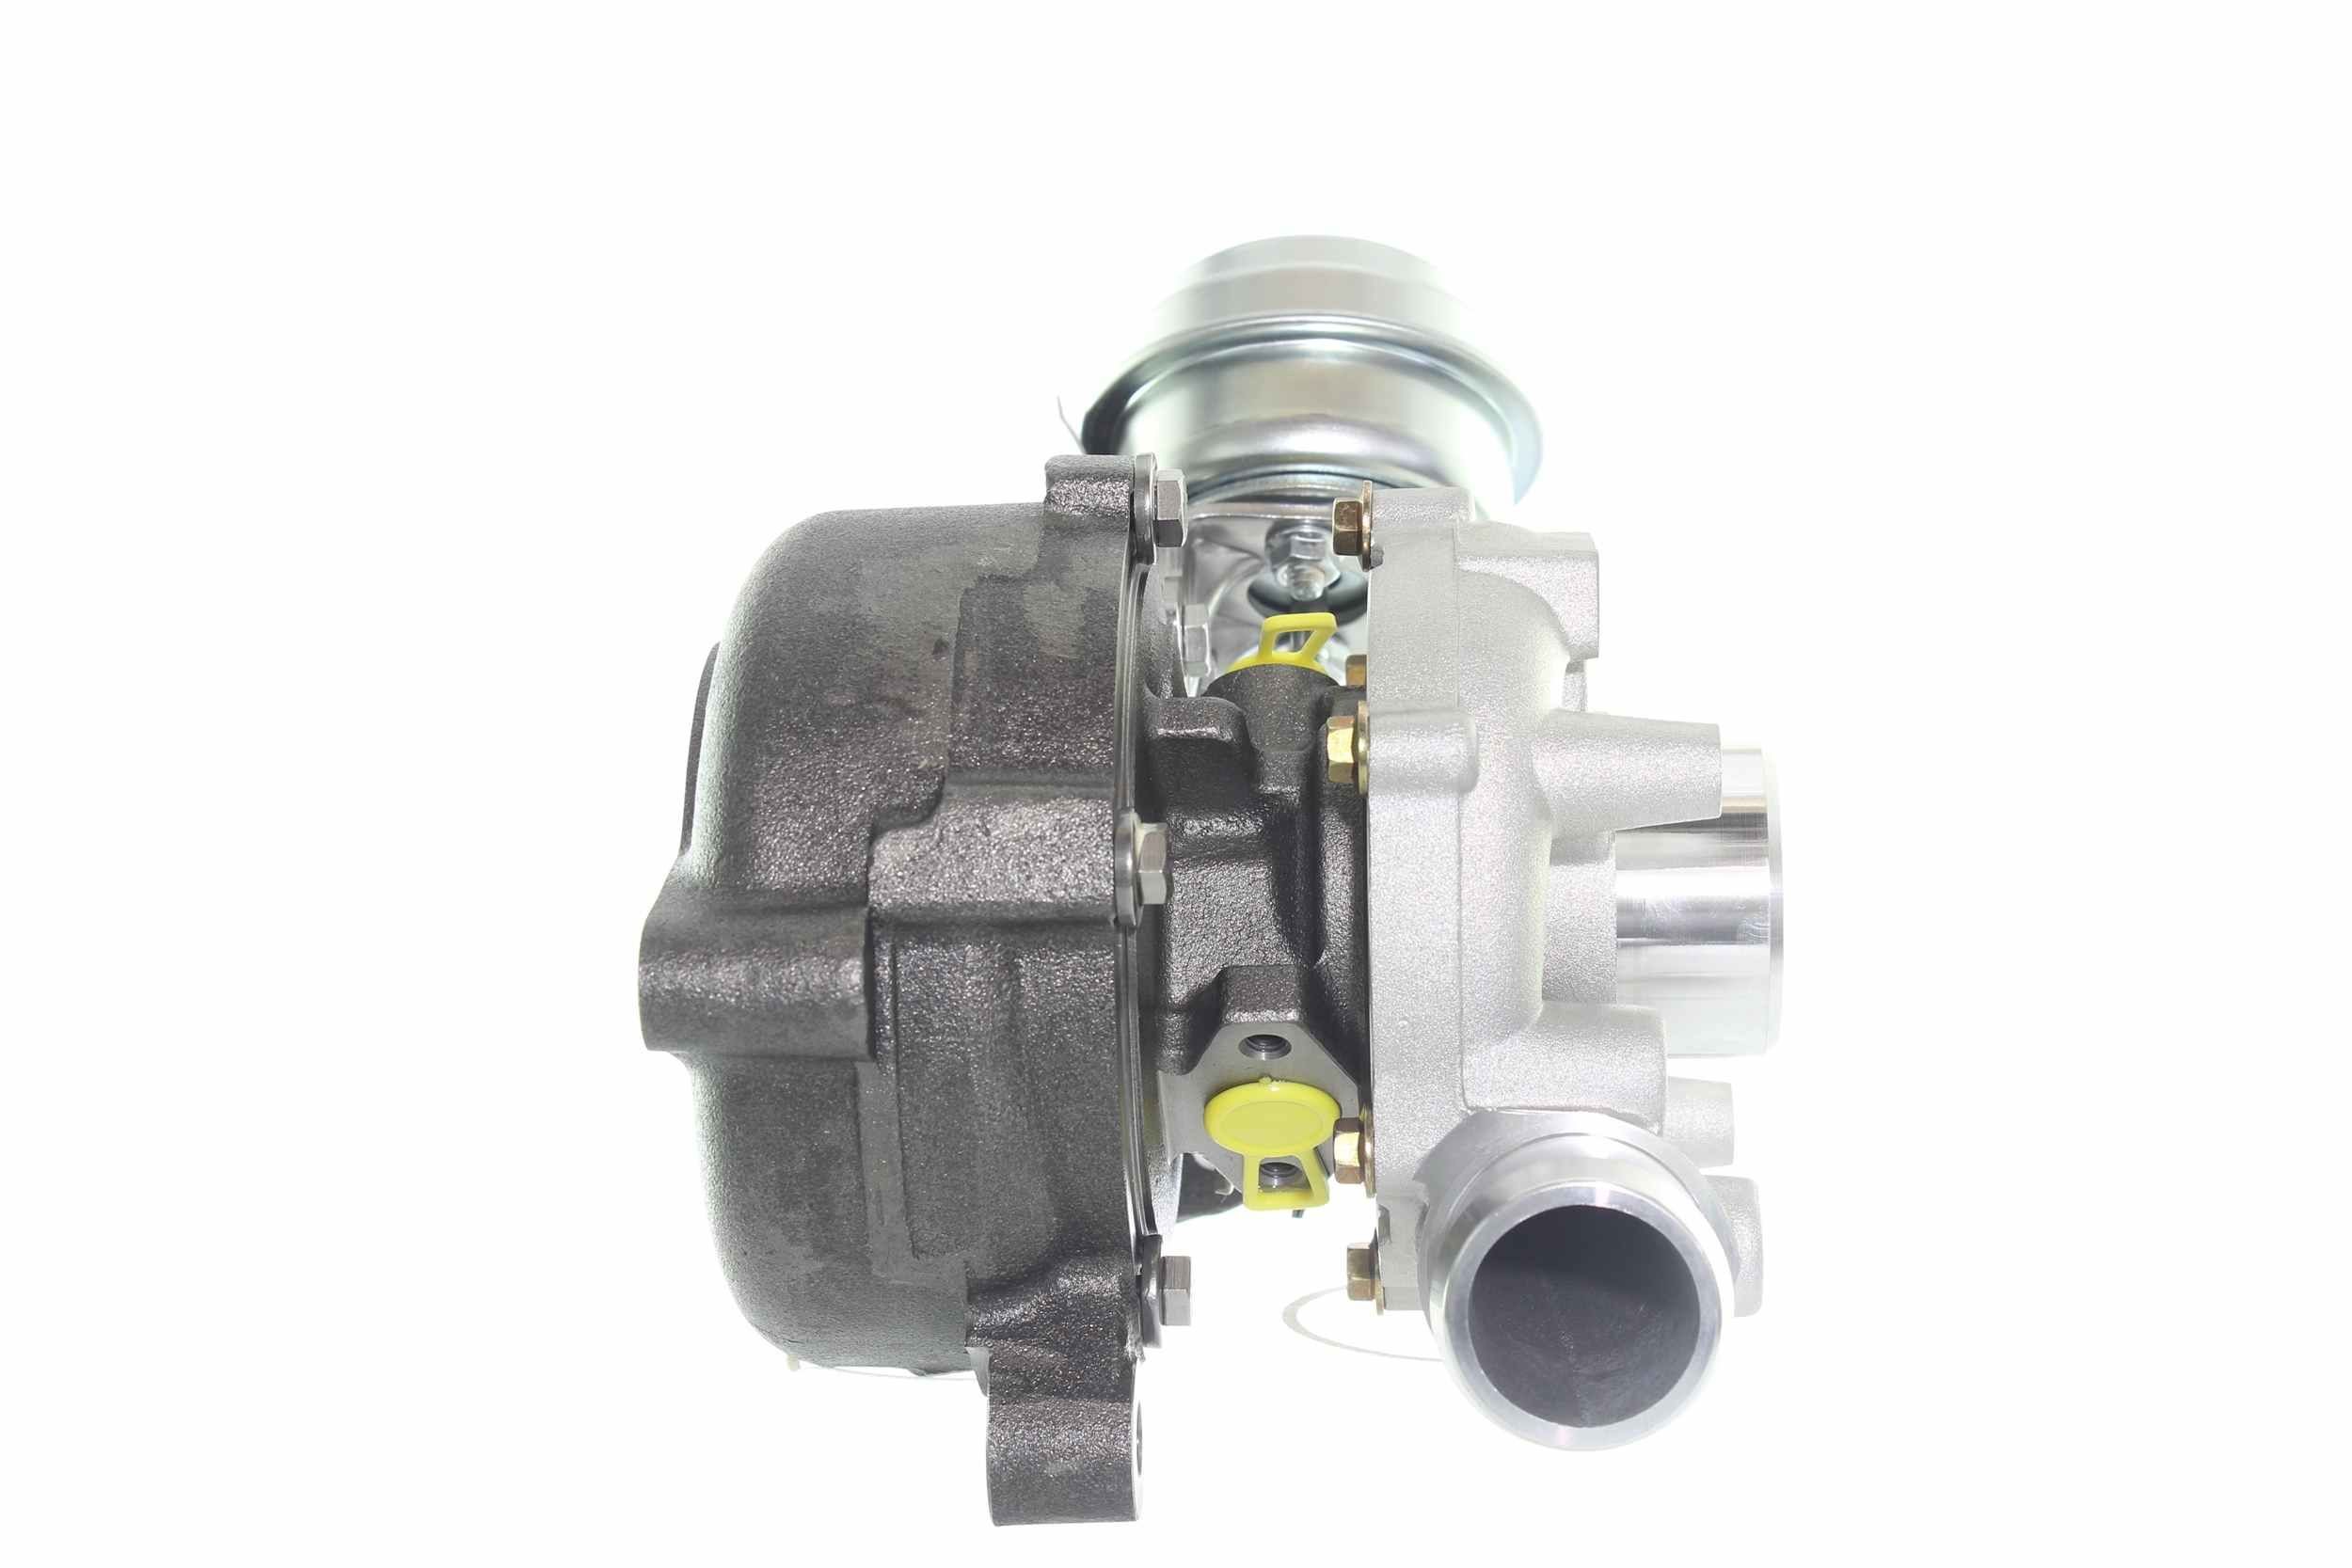 10900022 Turbocharger 4542310002 ALANKO Exhaust Turbocharger, Incl. Gasket Set, with attachment material